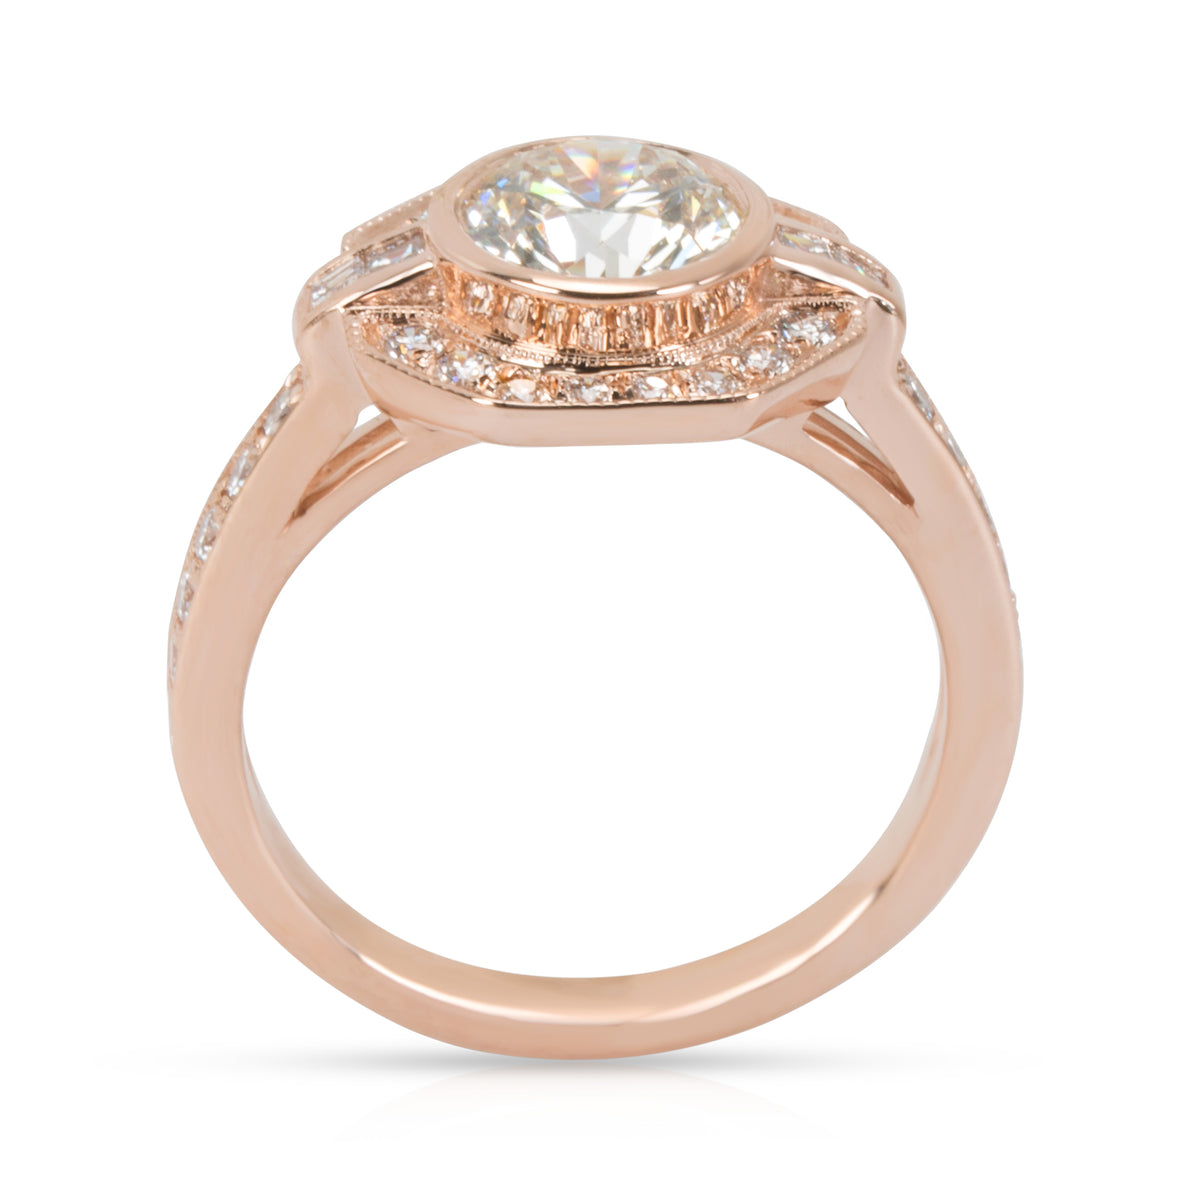 AGS Certified James Allen Diamond Engagement Ring in 14K Rose Gold